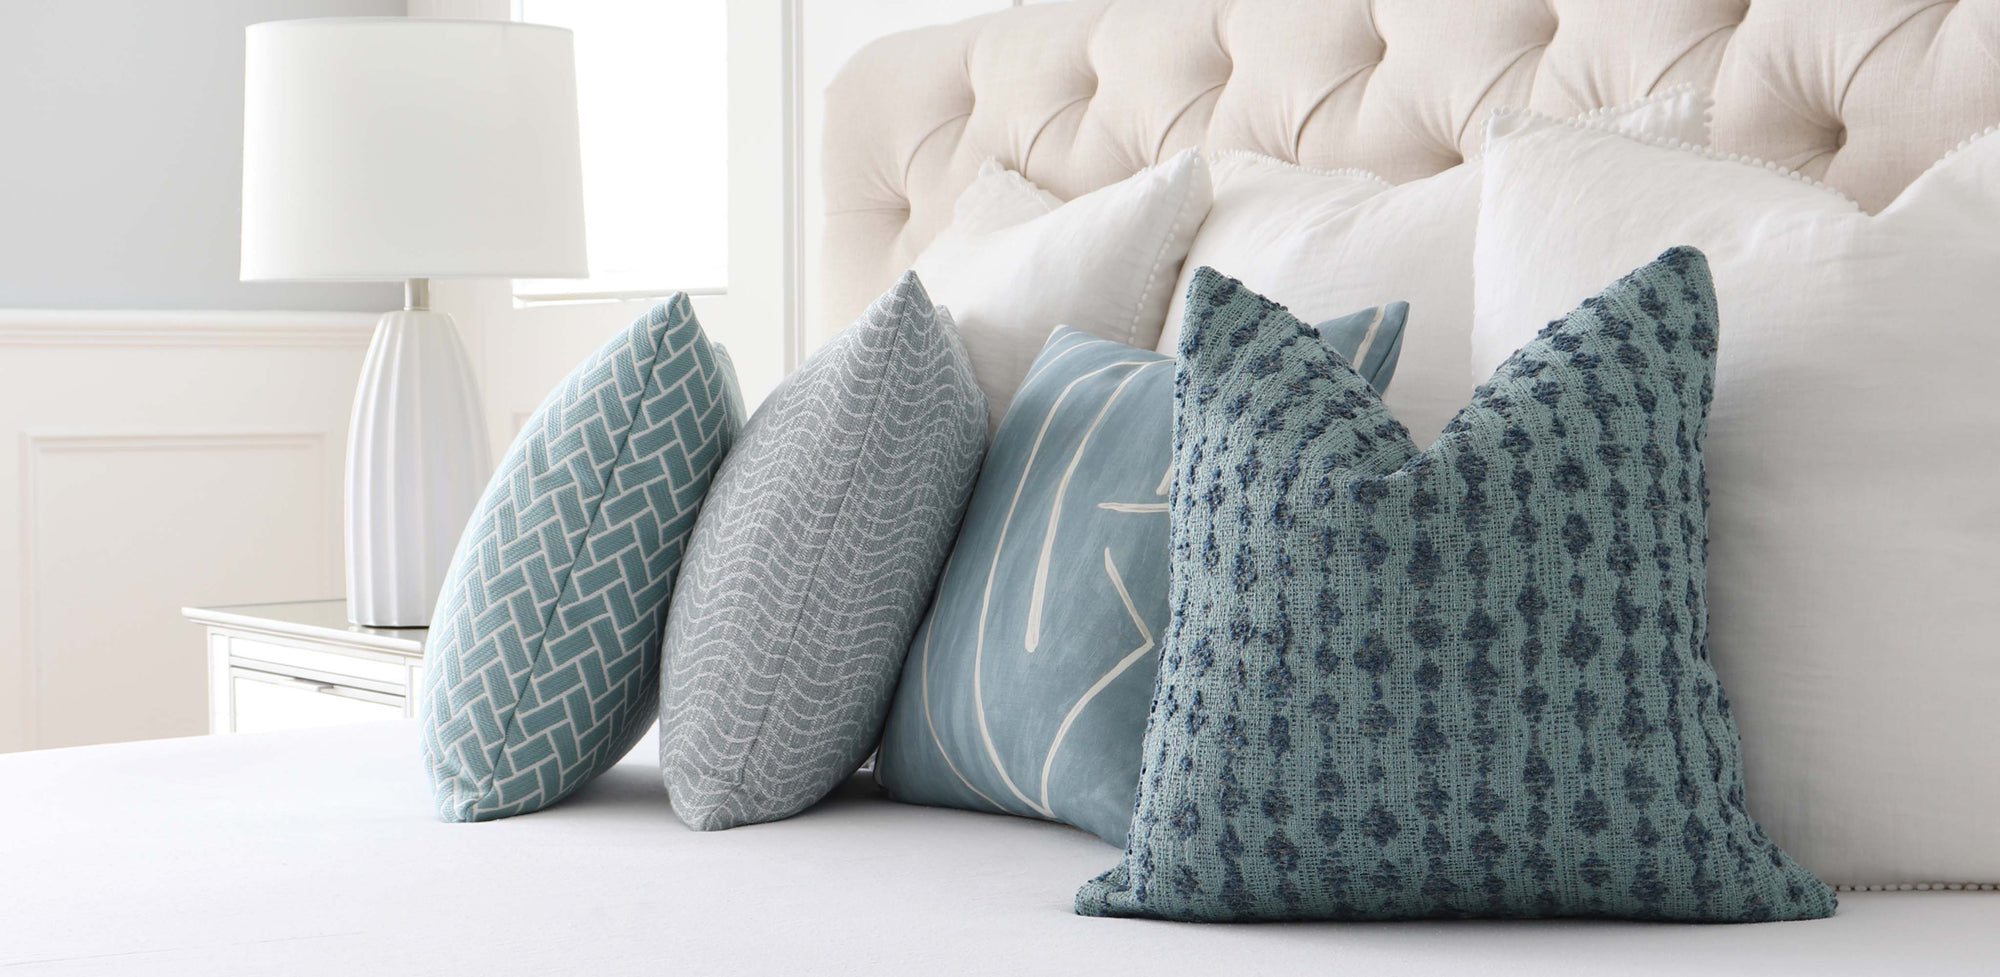 Chloe and Olive Designer Handcrafted Luxury Throw Pillows